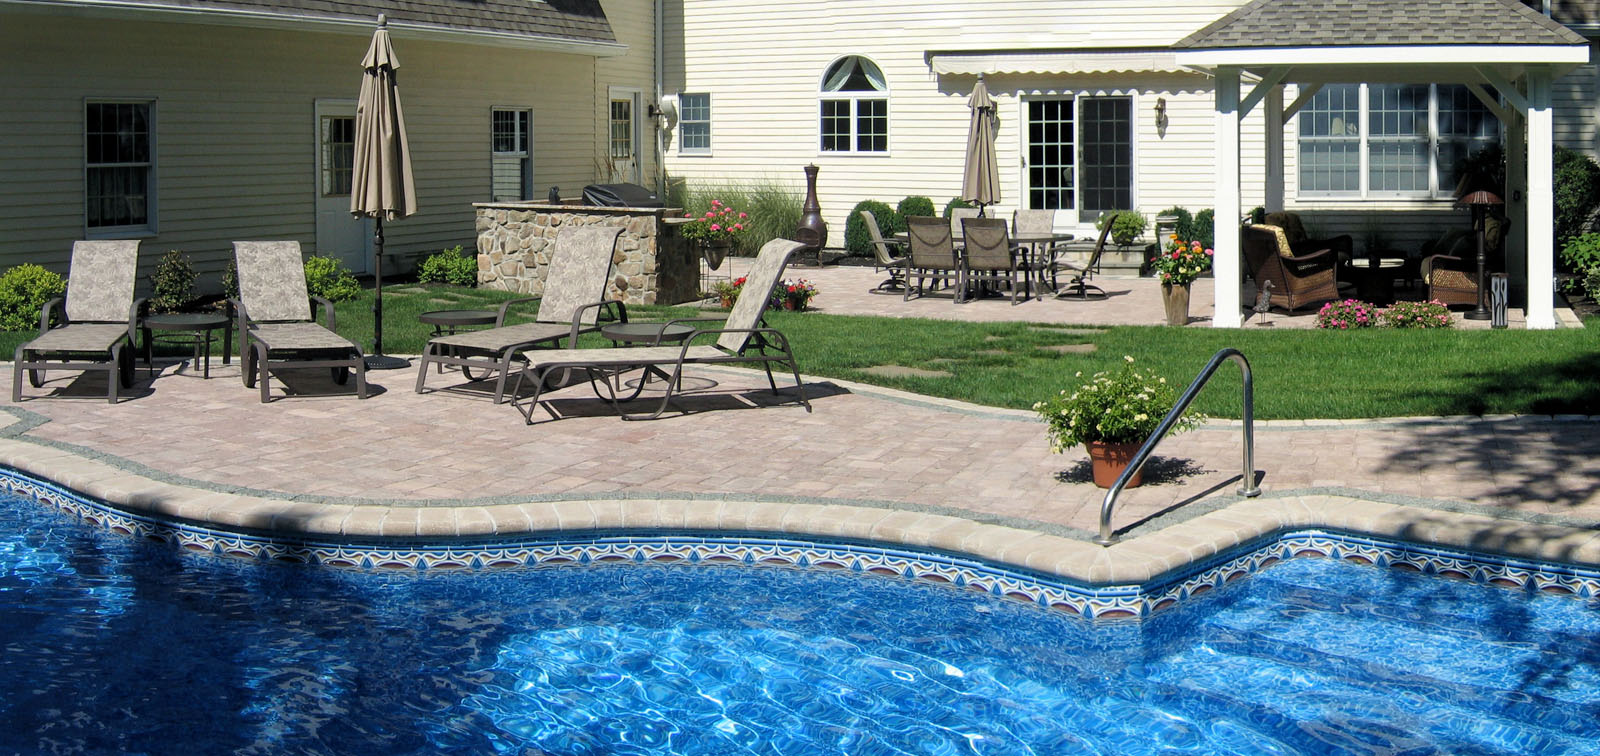 swimming pool with paver patio